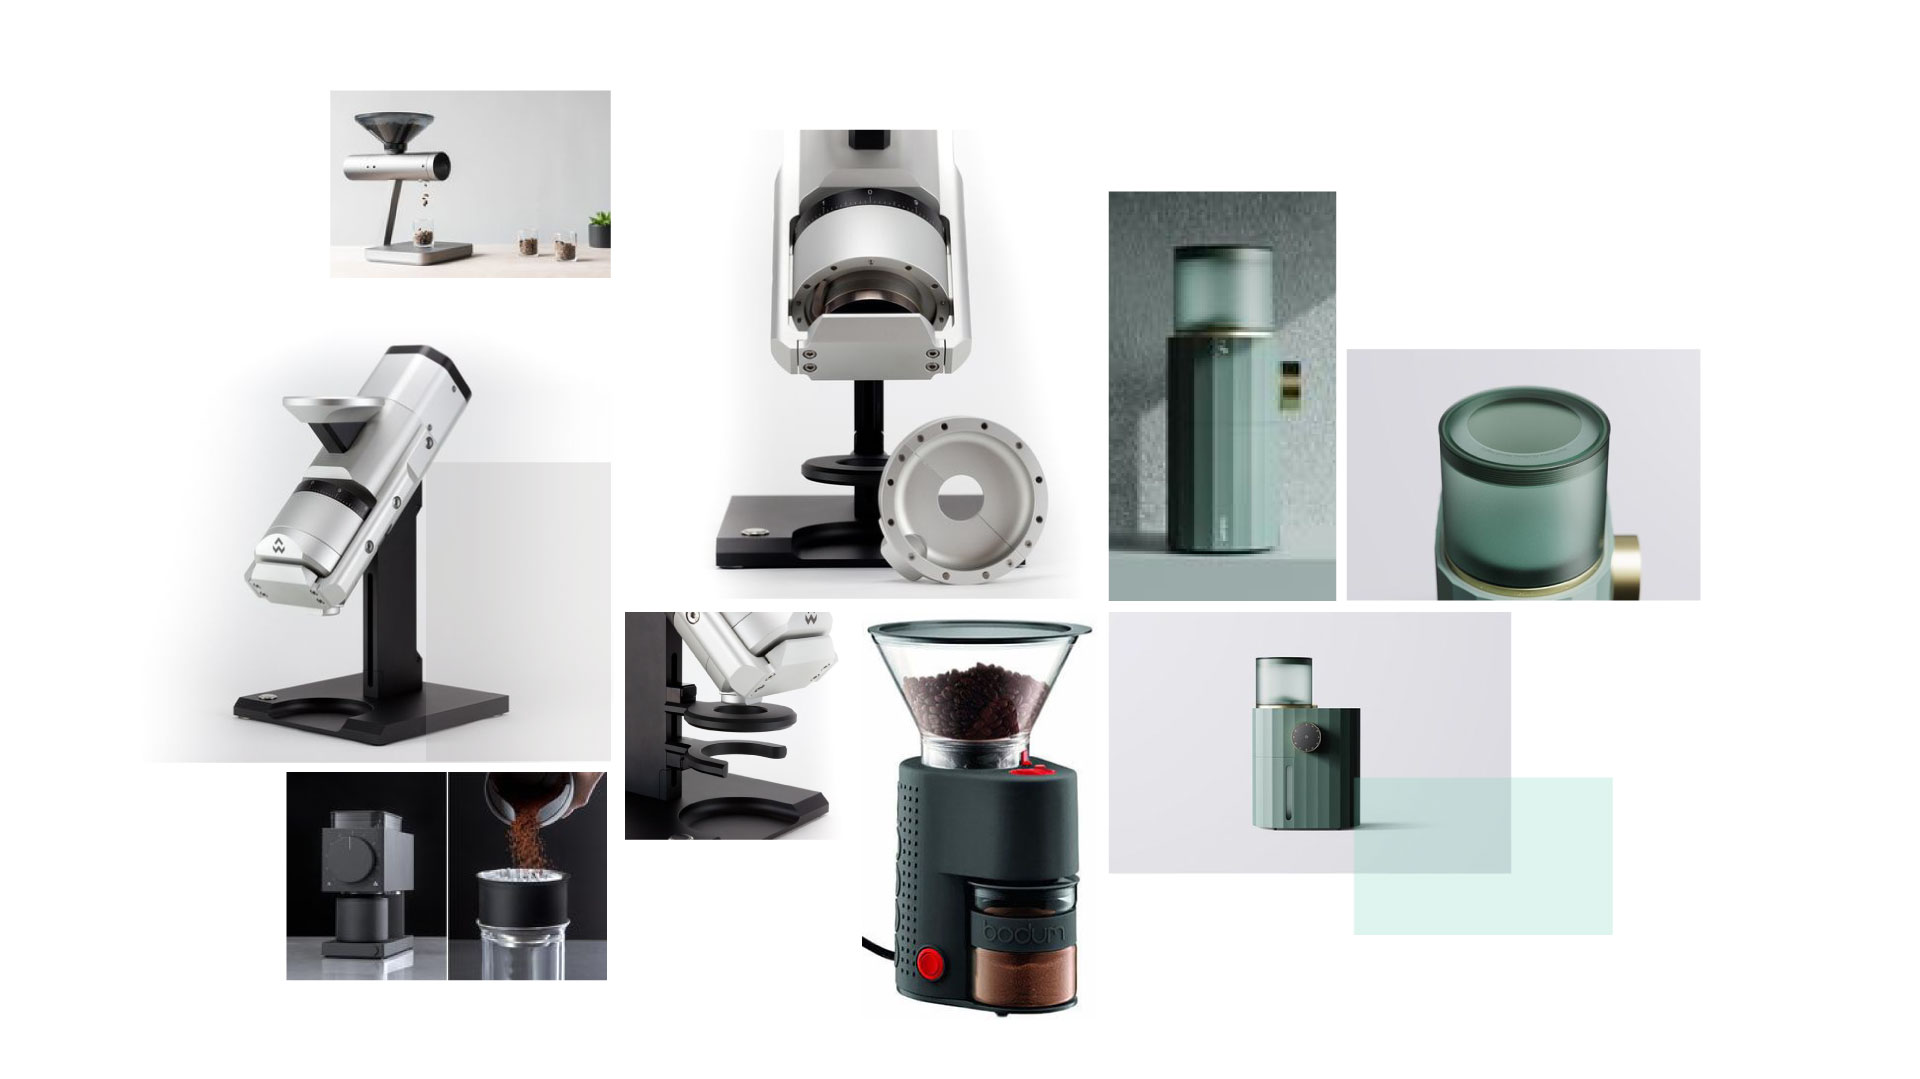 Moodboard for a coffee grinder